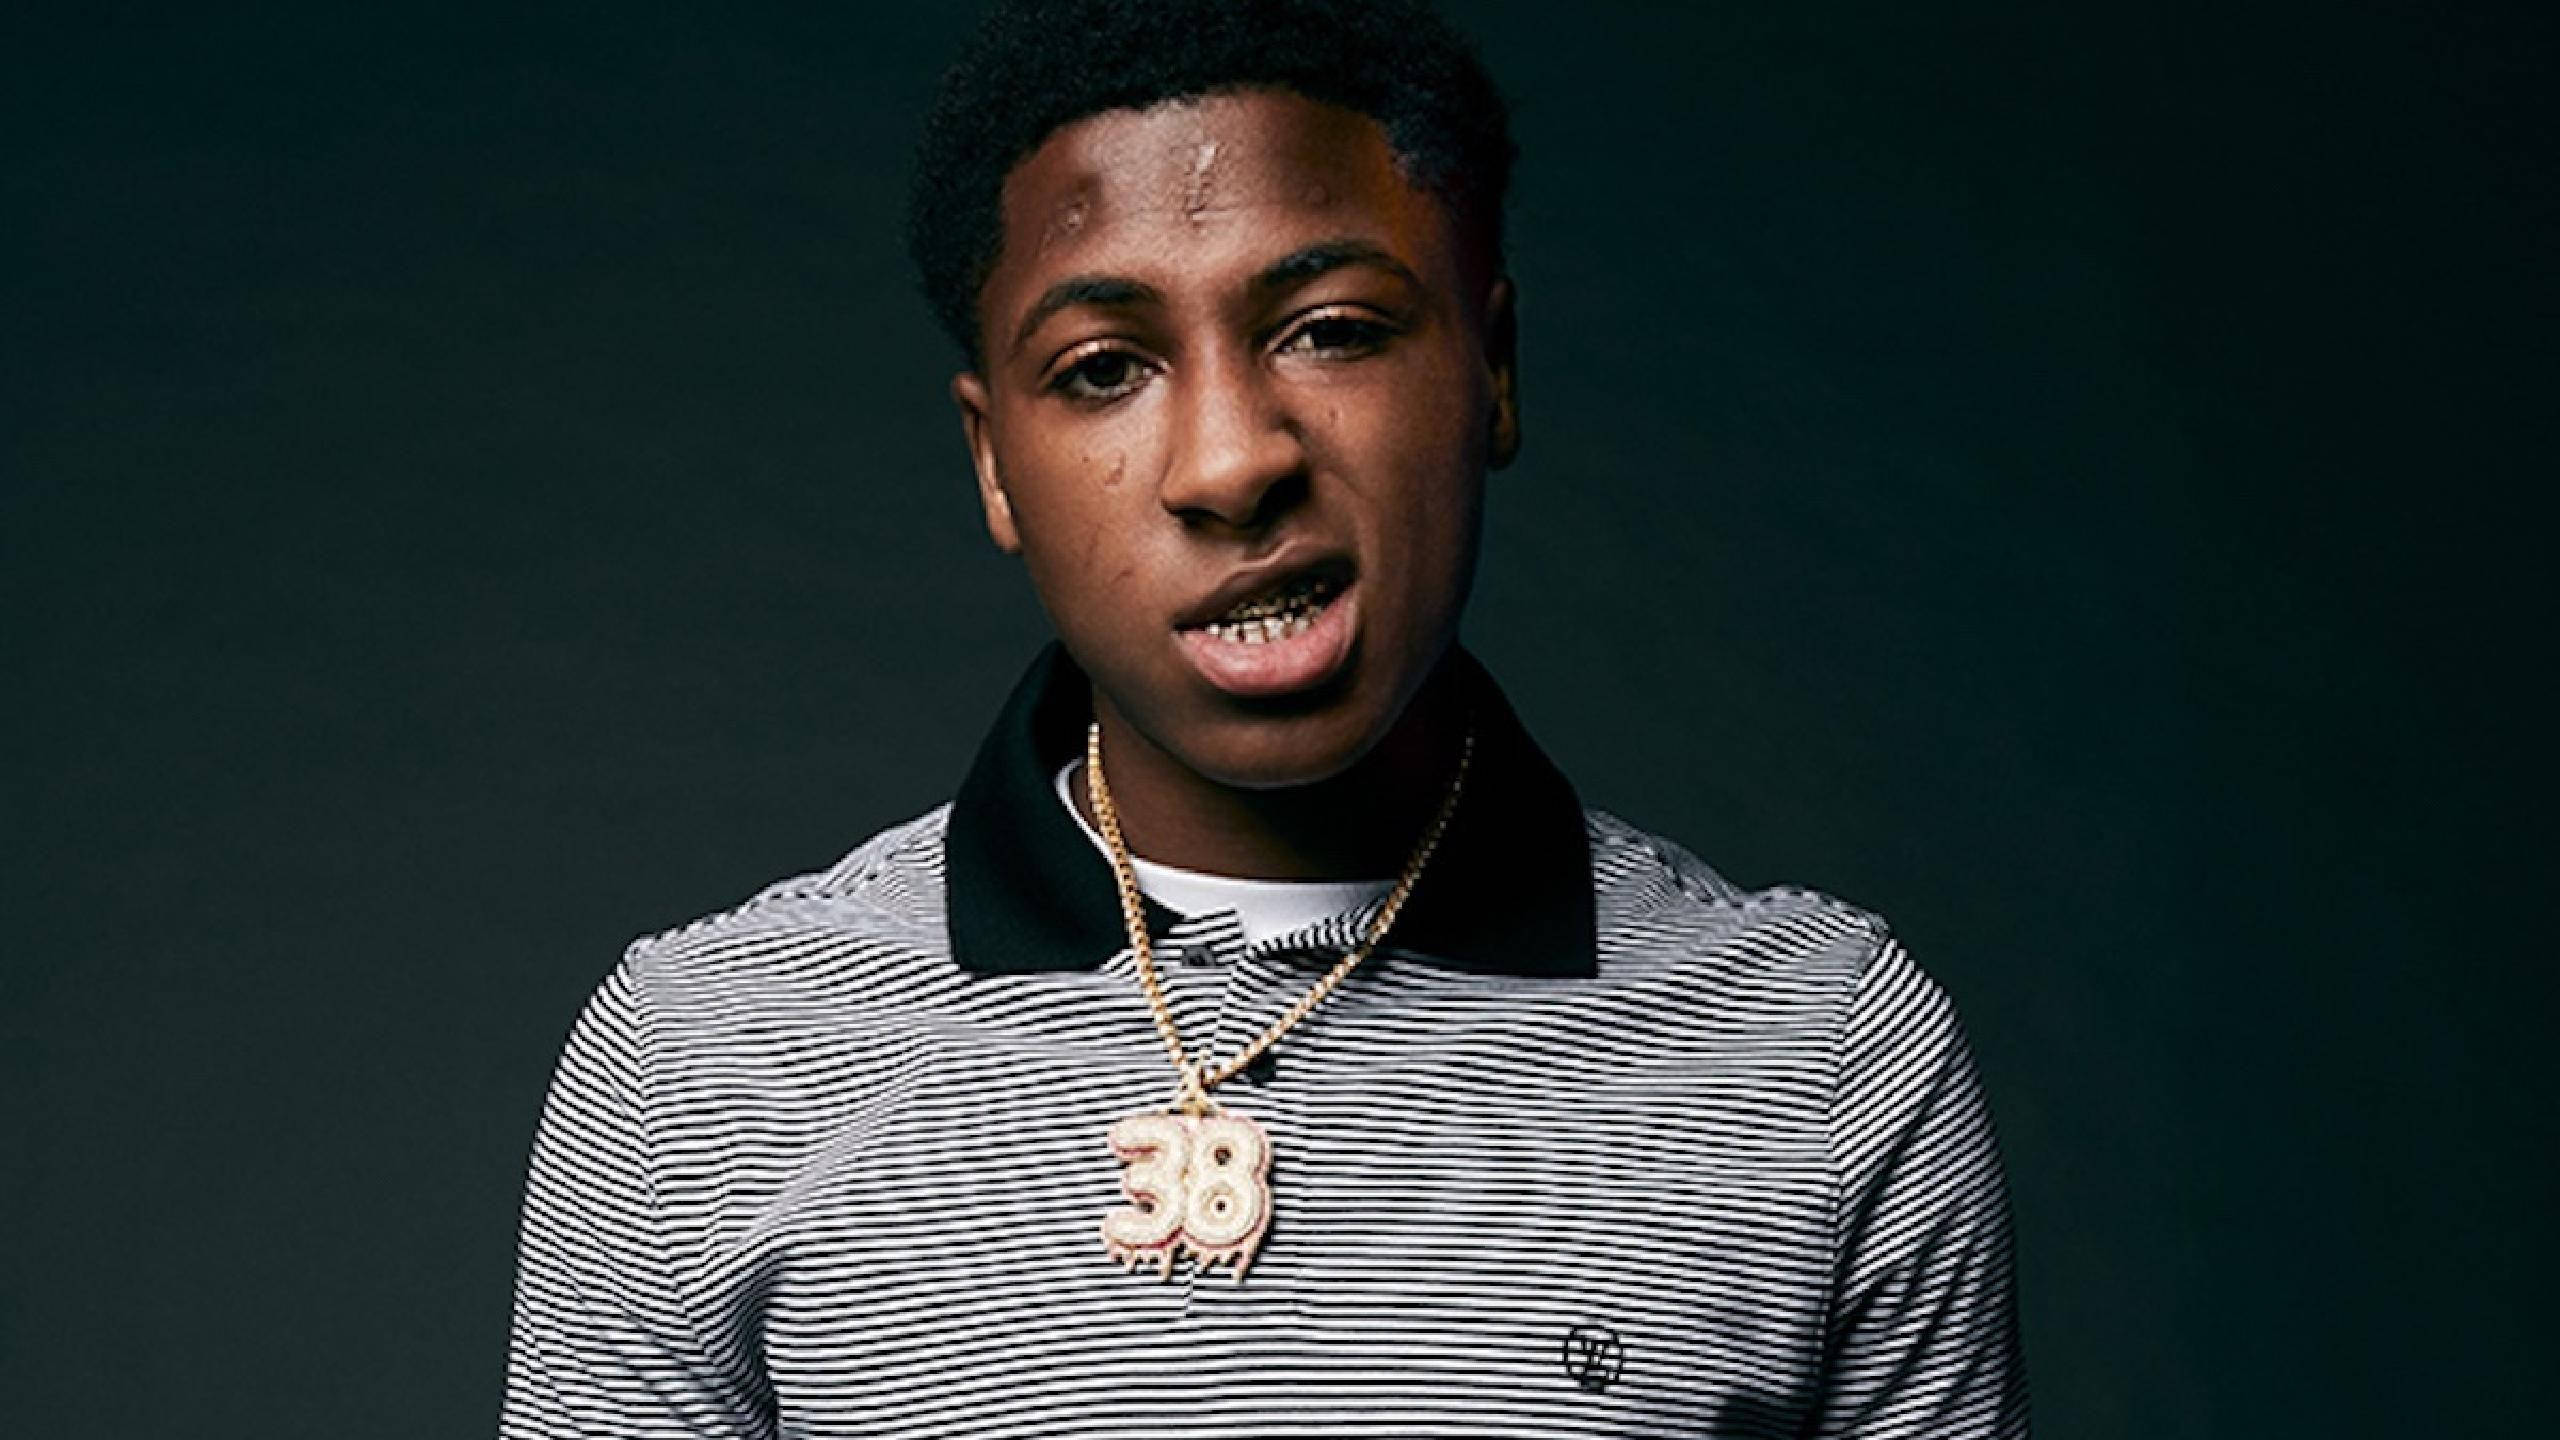 Young round. NBA YOUNGBOY 2022. YOUNGBOY never broke again. NBA YOUNGBOY рост. NBA YOUNGBOY Type Beat 2020.